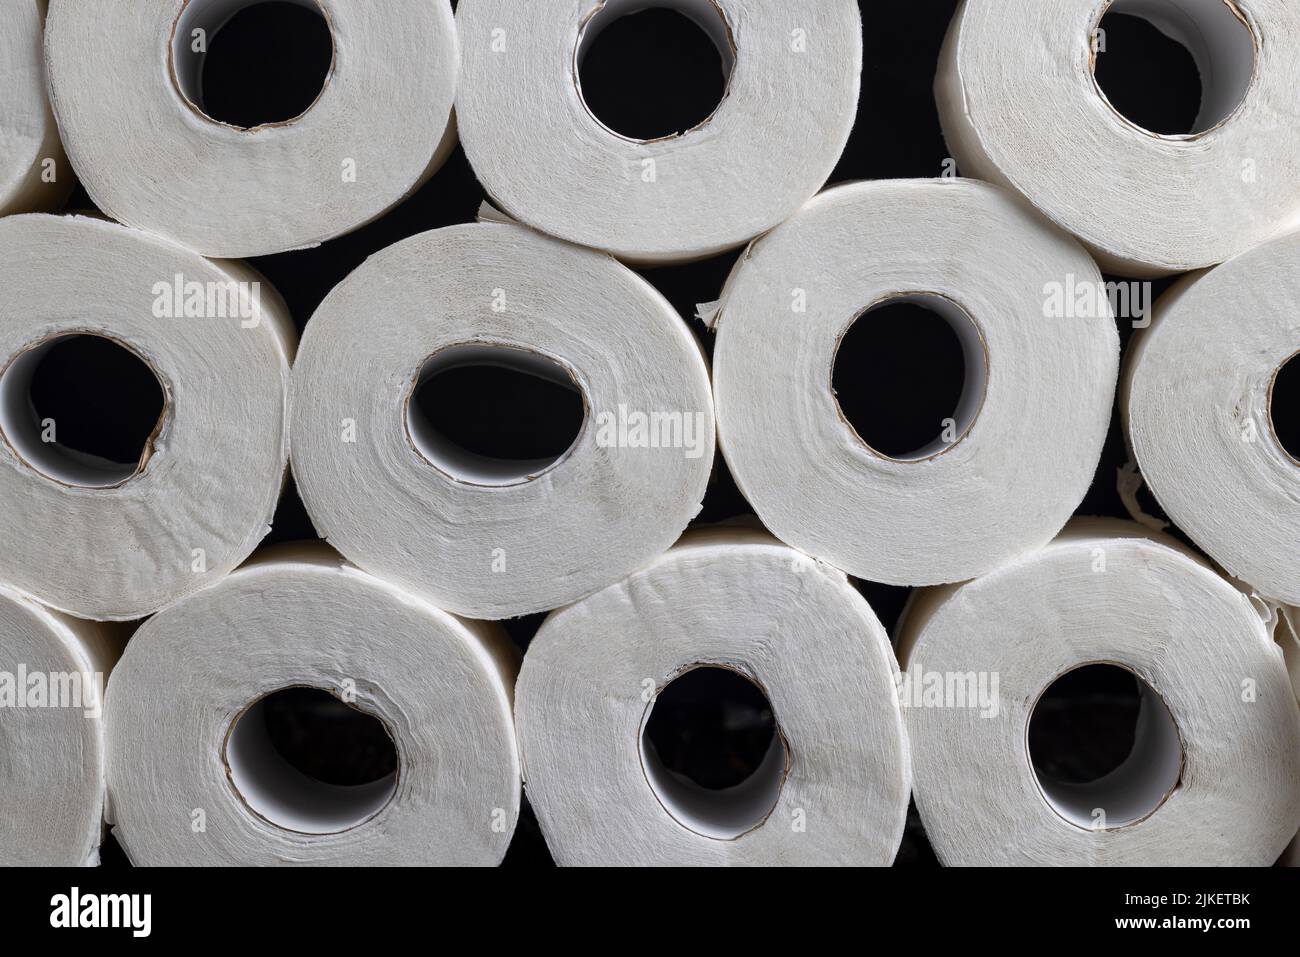 a large amount of toilet paper from recycled waste paper, toilet paper ...